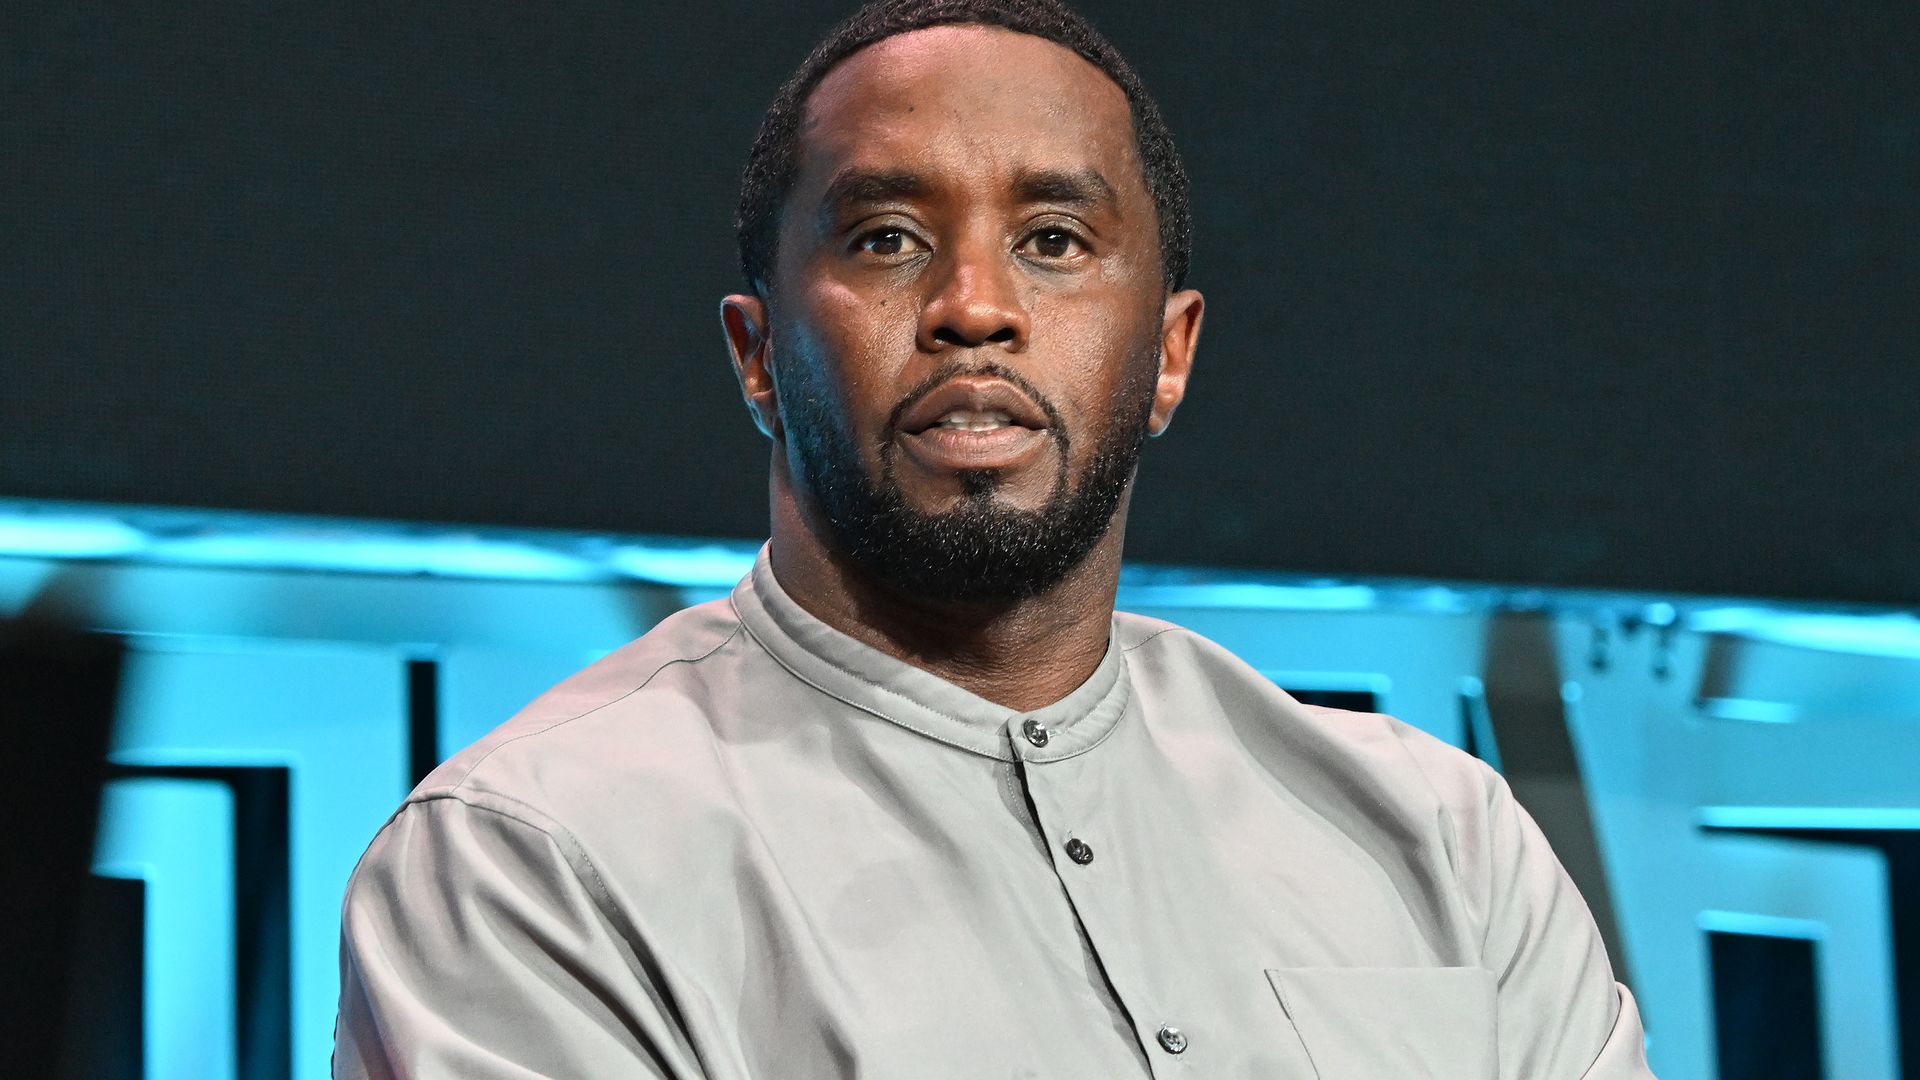 Sean 'Diddy' Combs' $40M Los Angeles home becomes tourist destination after raid – see photos